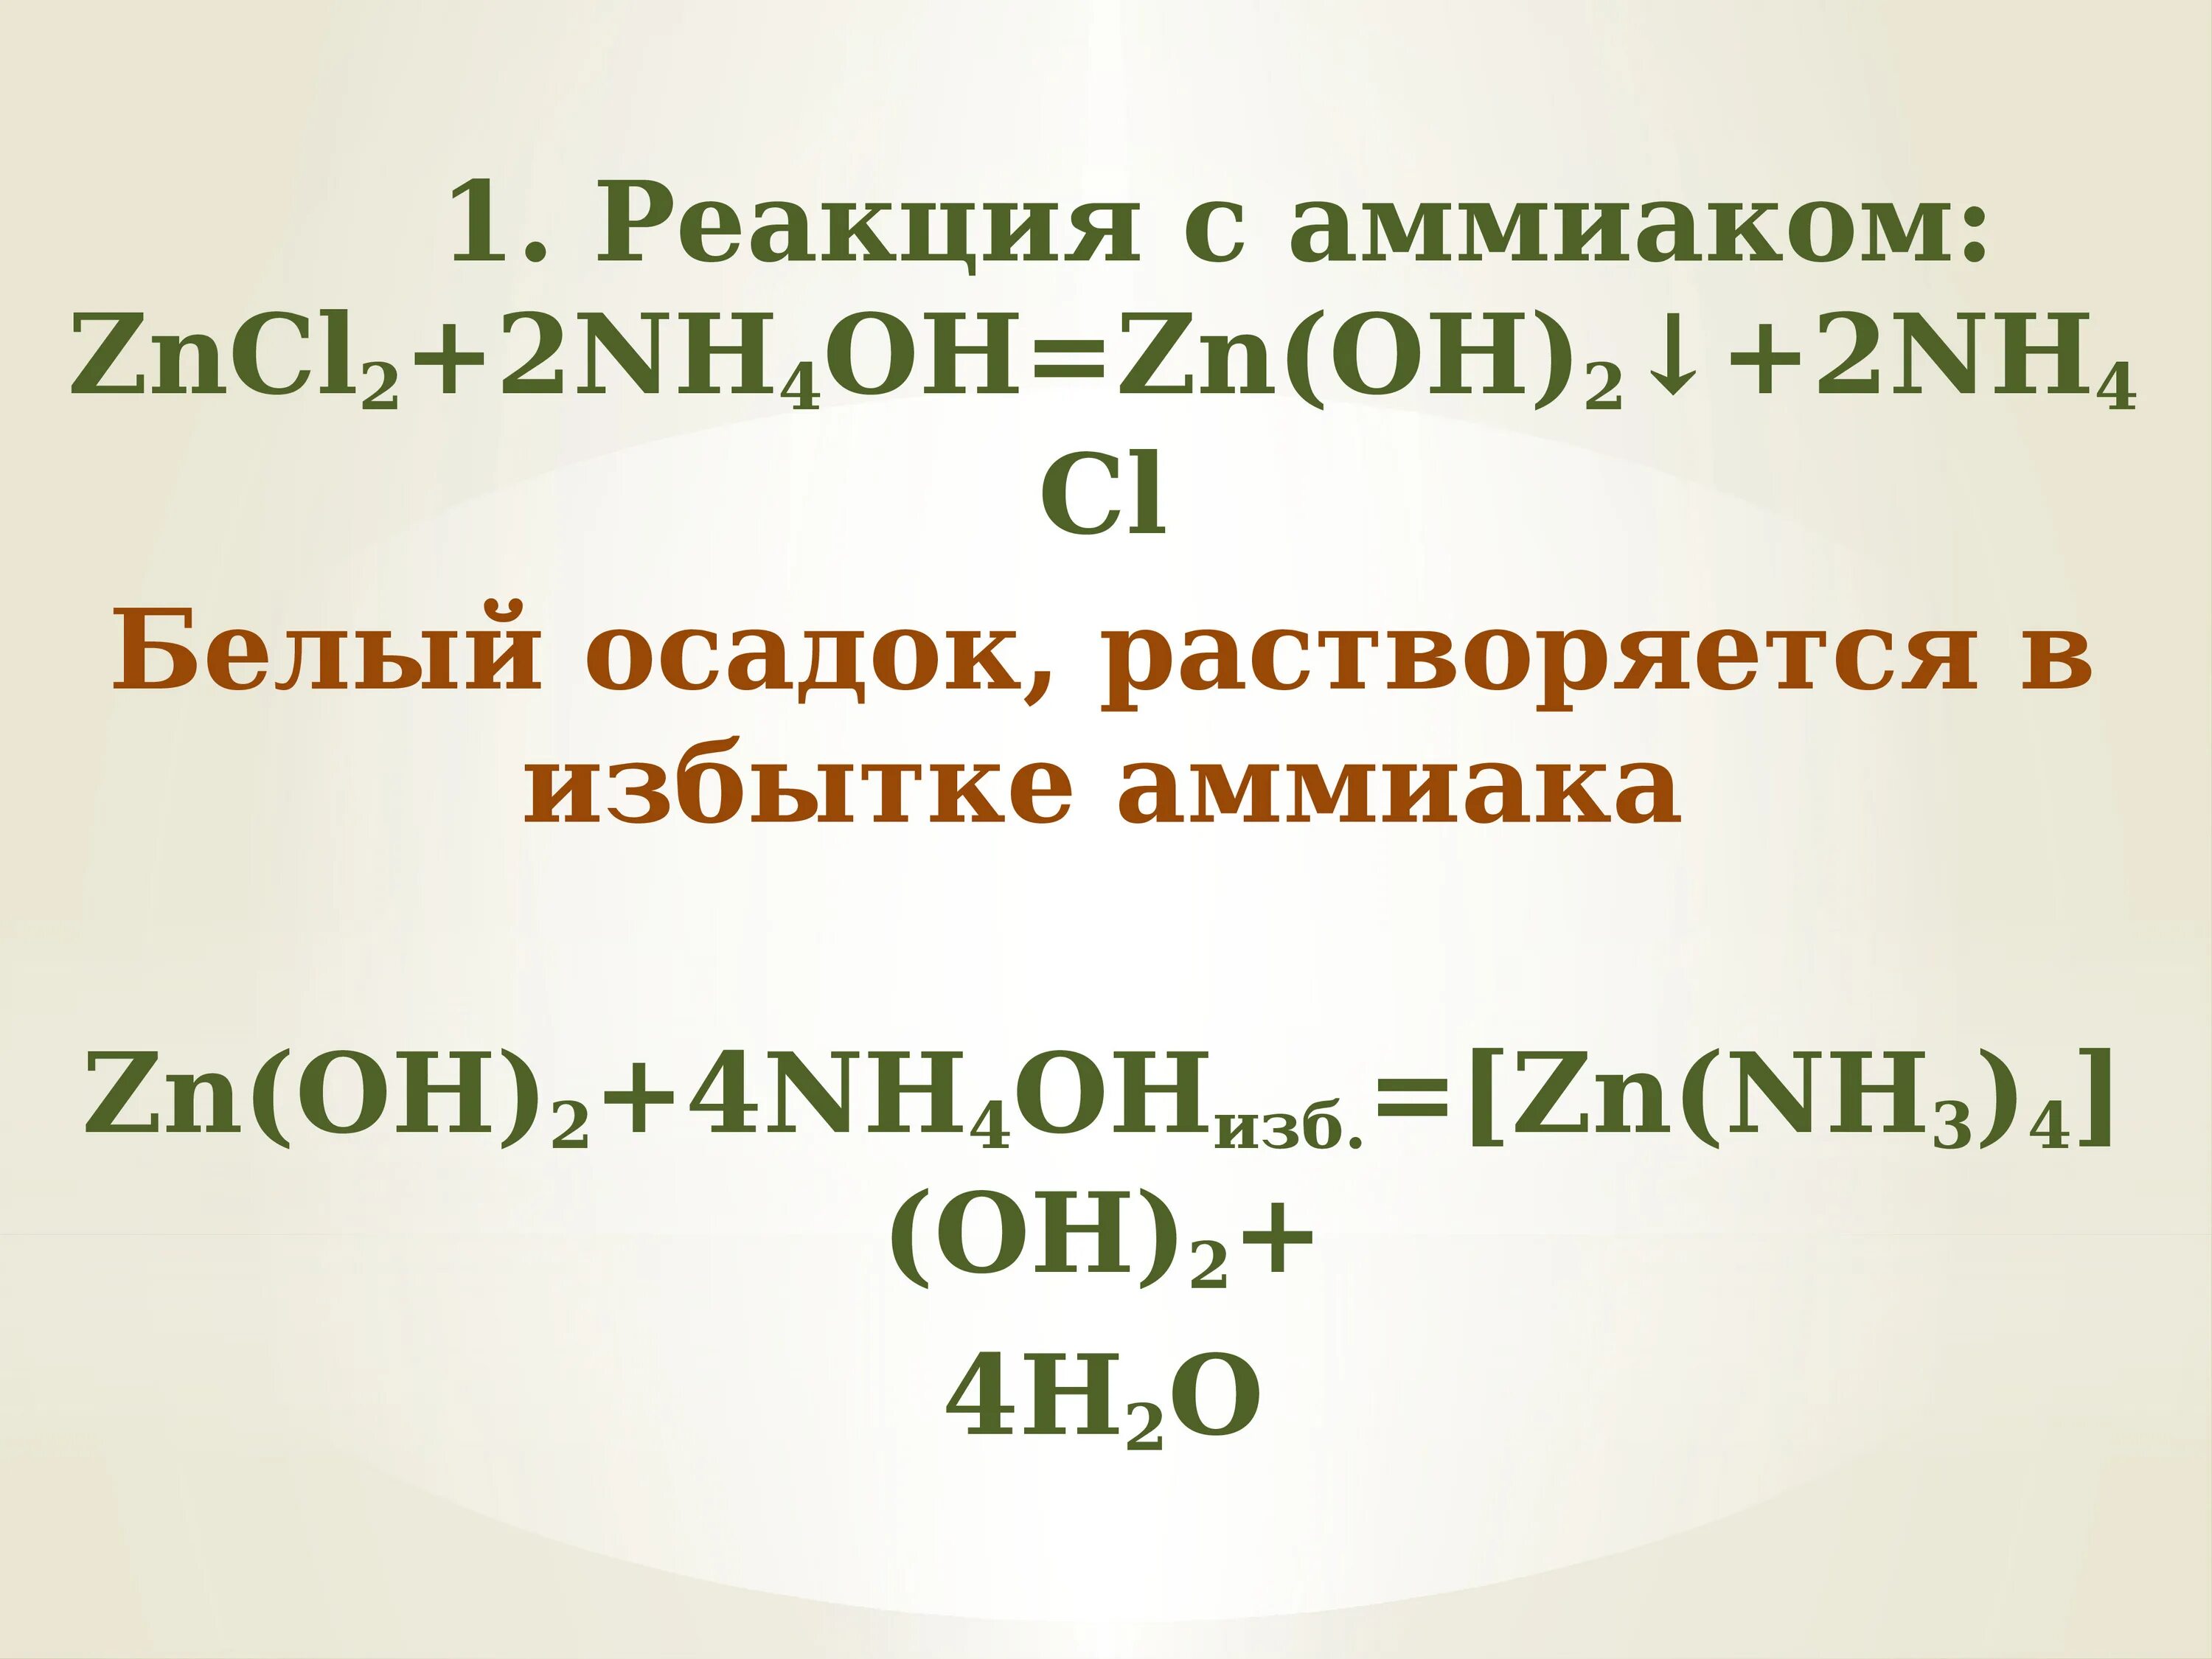 Nh4cl zn. Zncl2 nh3 h2o. ZN Oh 2 nh4oh. Zncl2 nh4oh. [ZN(nh3)4](Oh)2.